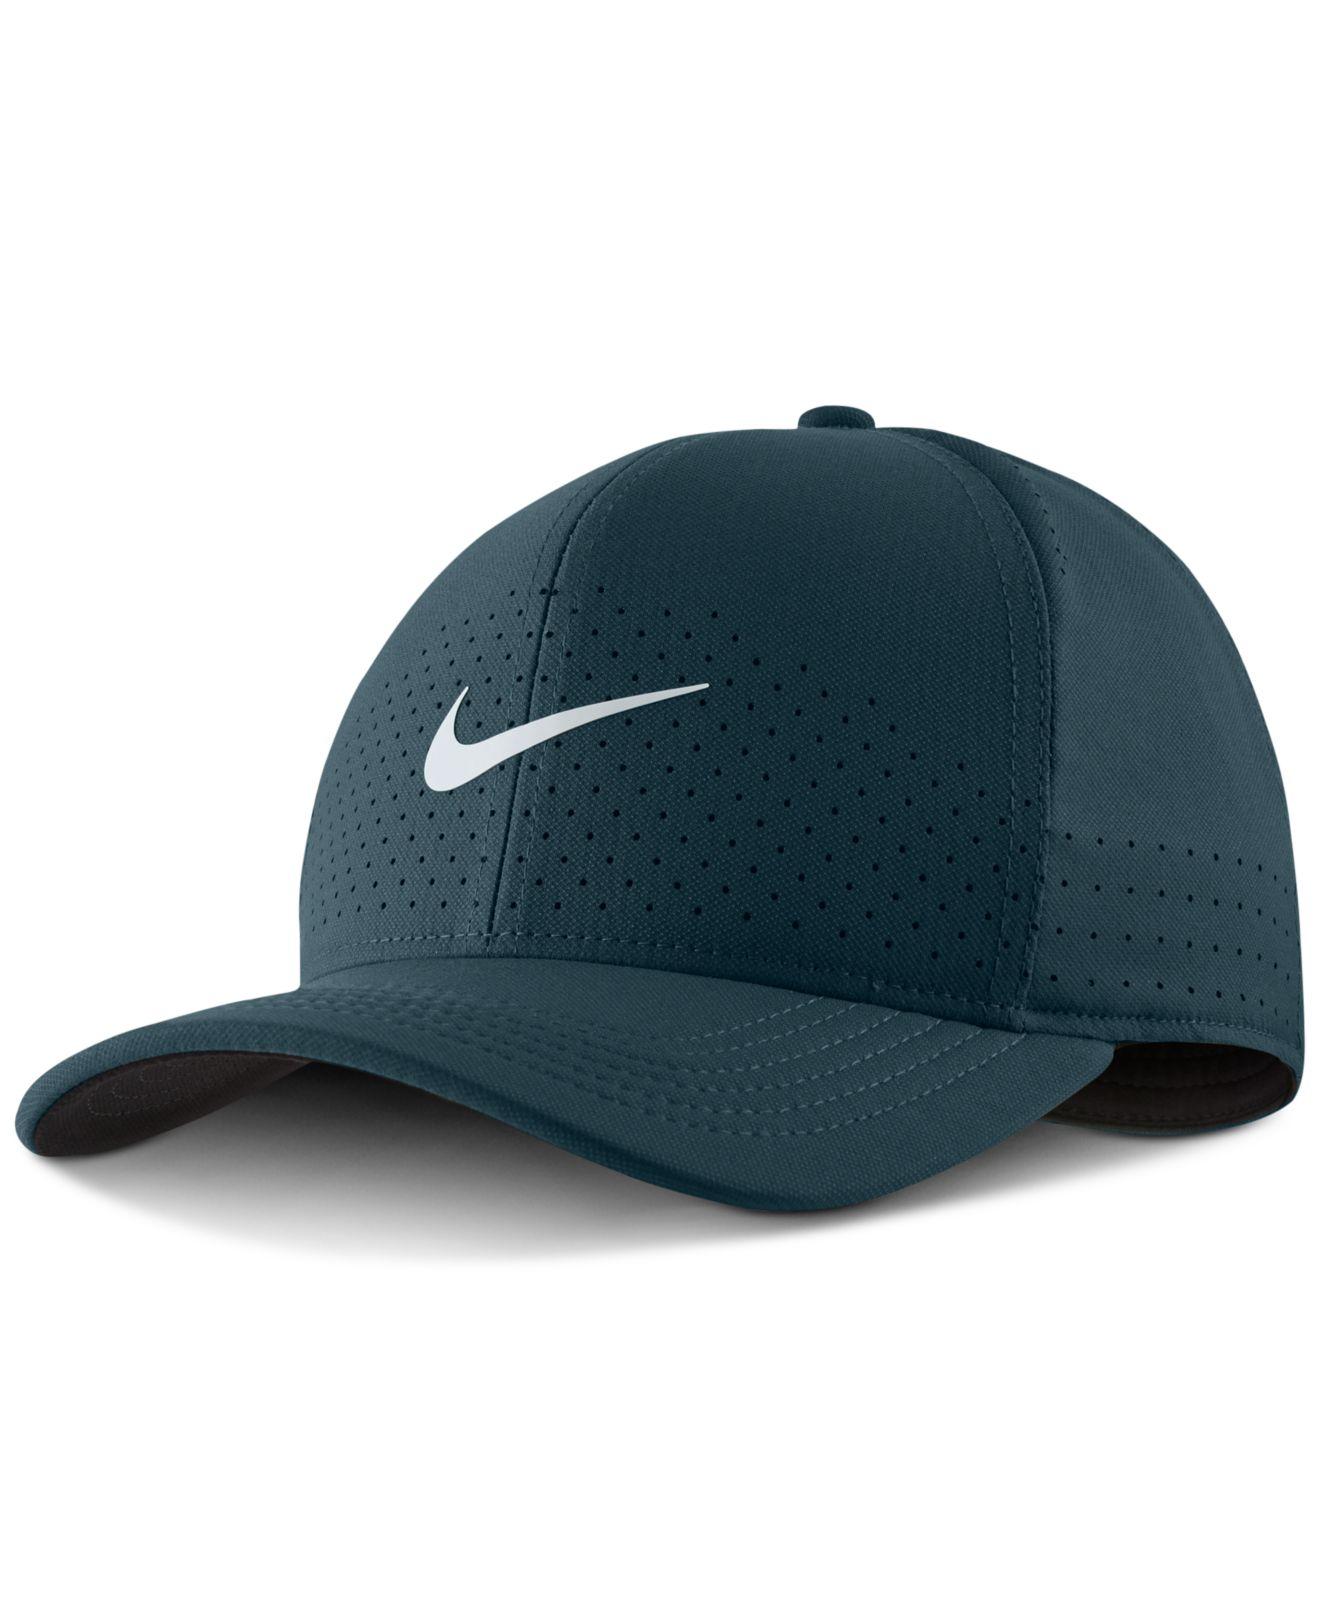 Nike Aerobill Classic Training Hat in Blue for Men - Lyst